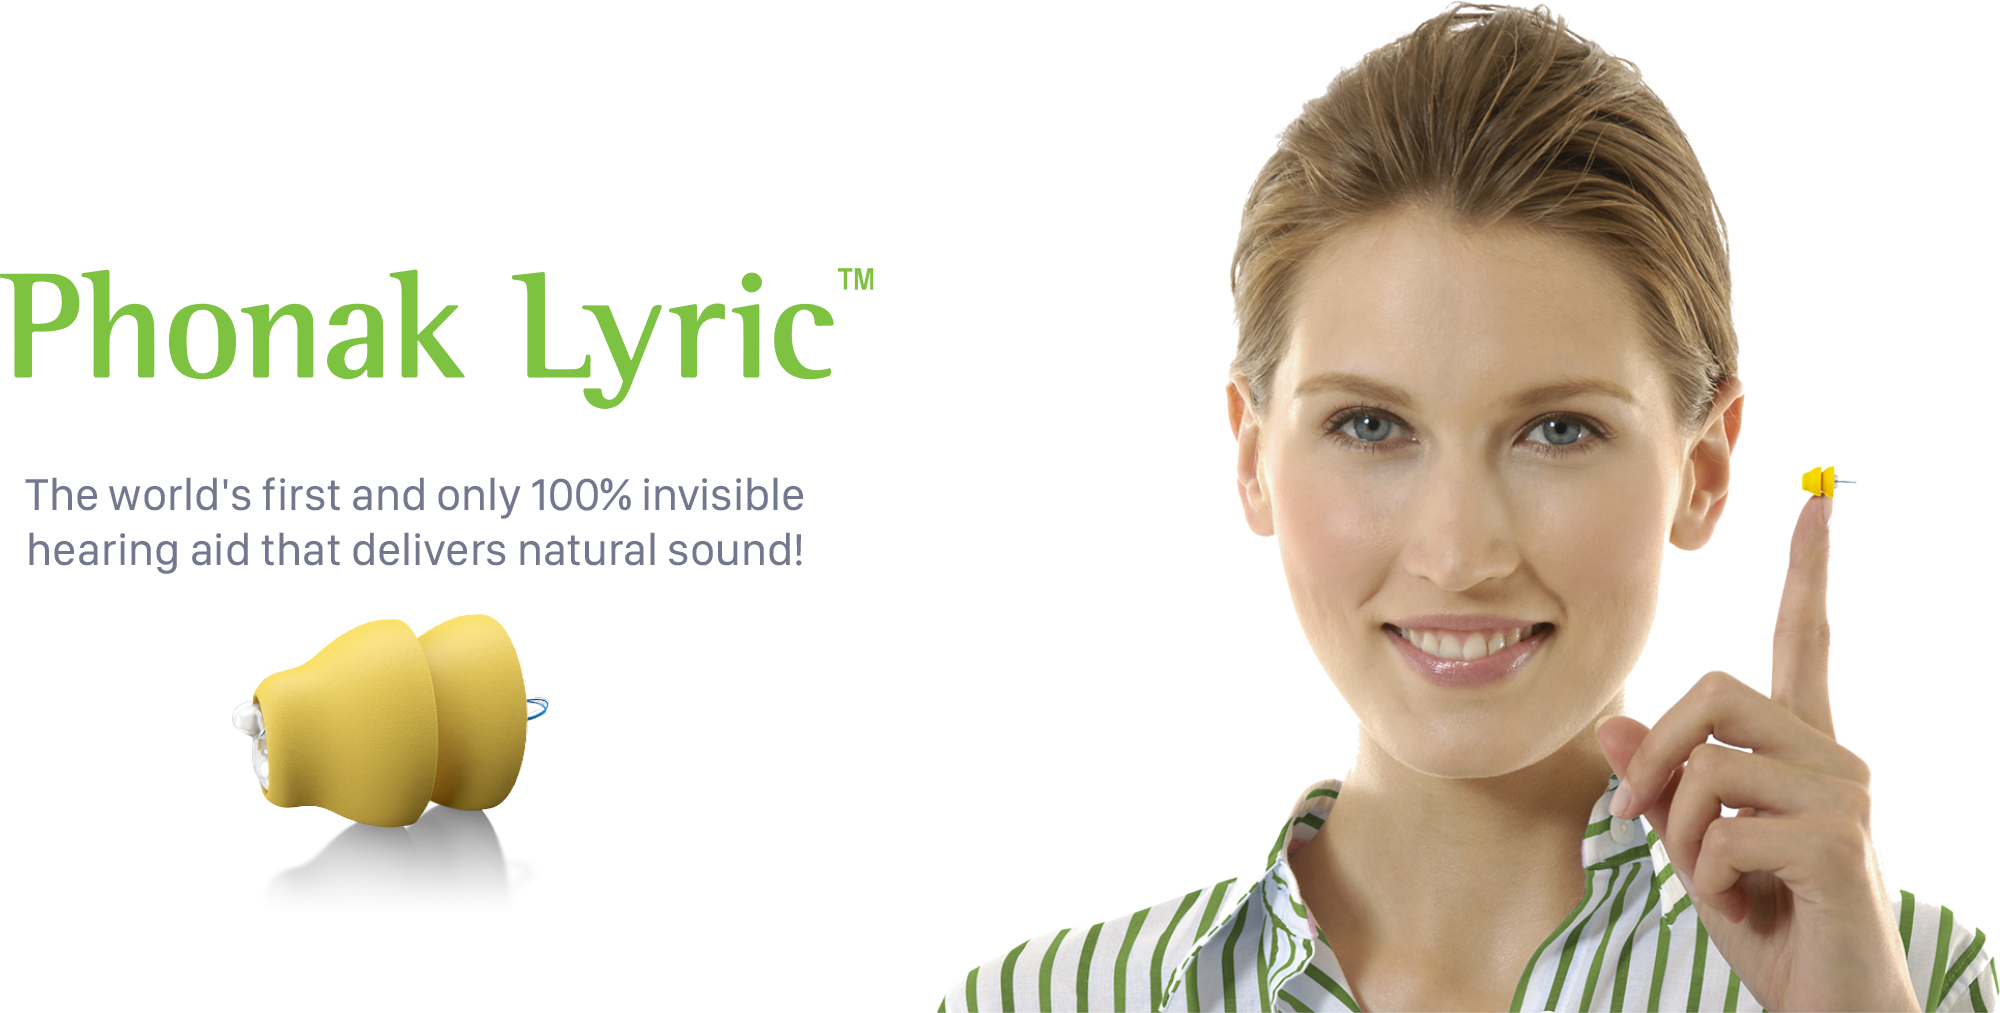 Phonak Lyric™ – The world’s only 100% invisible hearing aid. Unlike traditional hearing aids, Lyric is placed deep in the ear canal, making it 100% invisible. It requires no maintenance or batteries to change or charge. Worn 24 hours a day, 7 days a week. Contact us today to learn more.